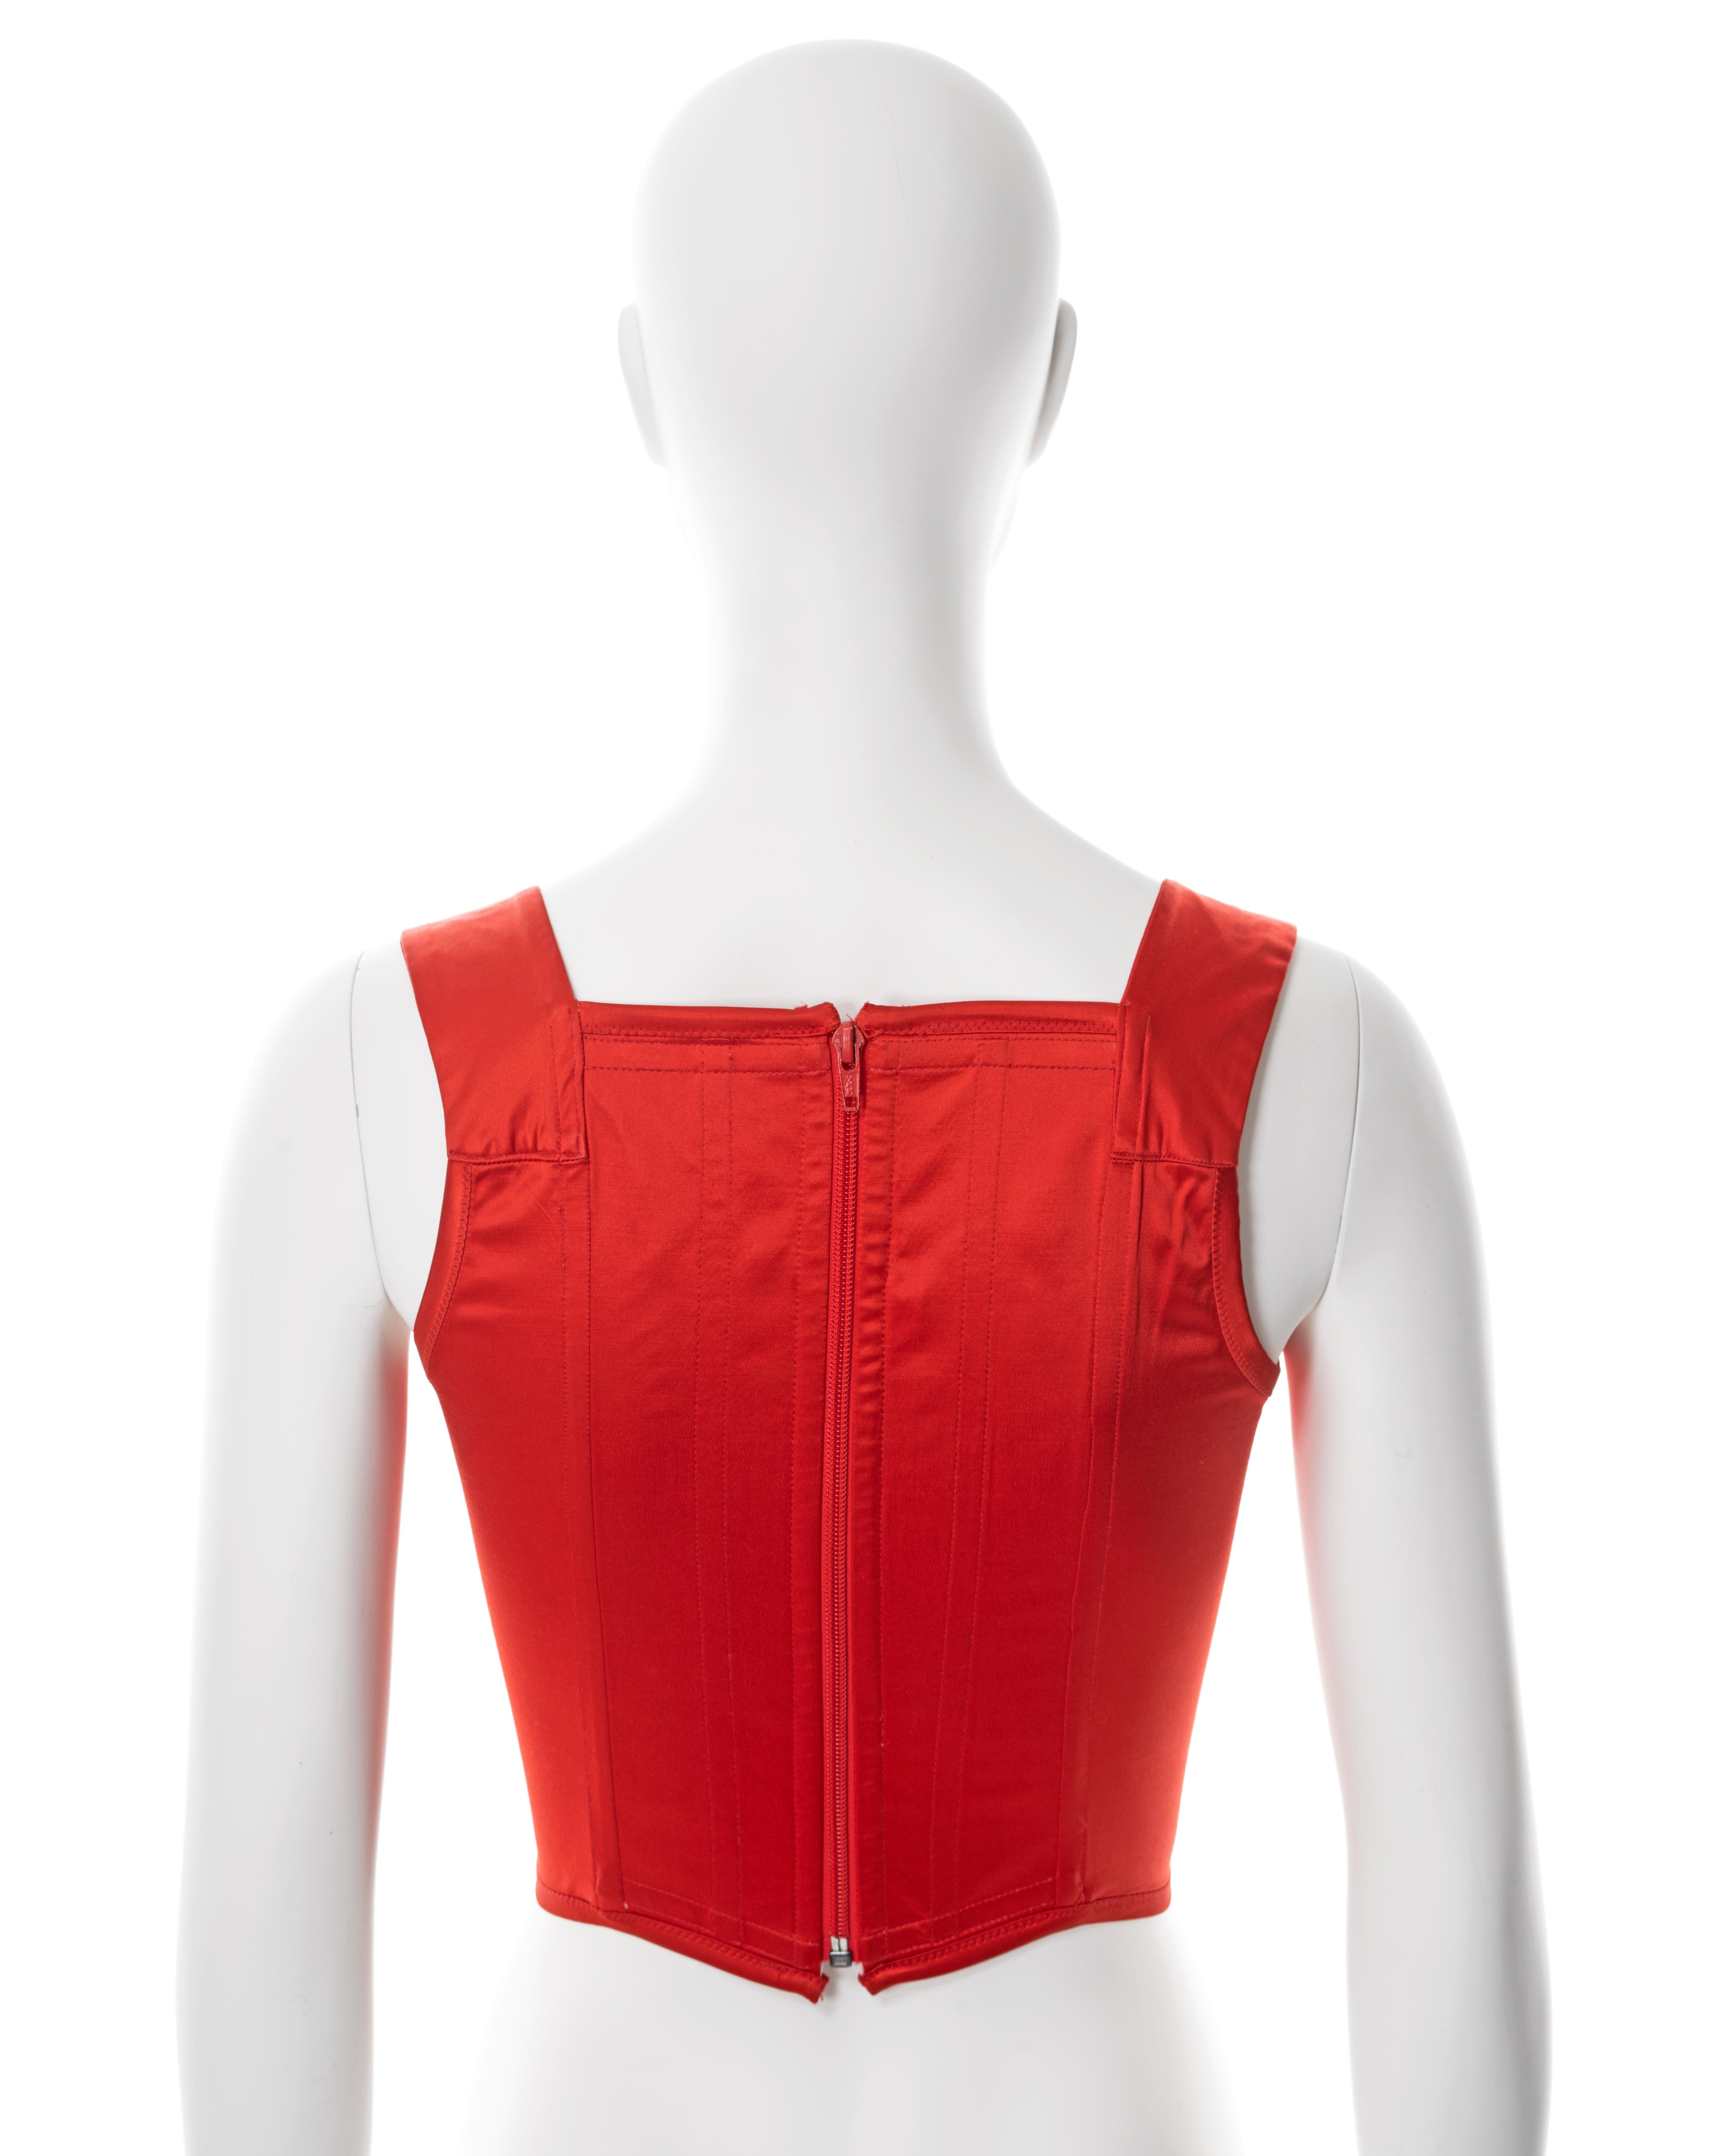 Women's Vivienne Westwood red satin corset with embroidered orb,  c. 1990s For Sale